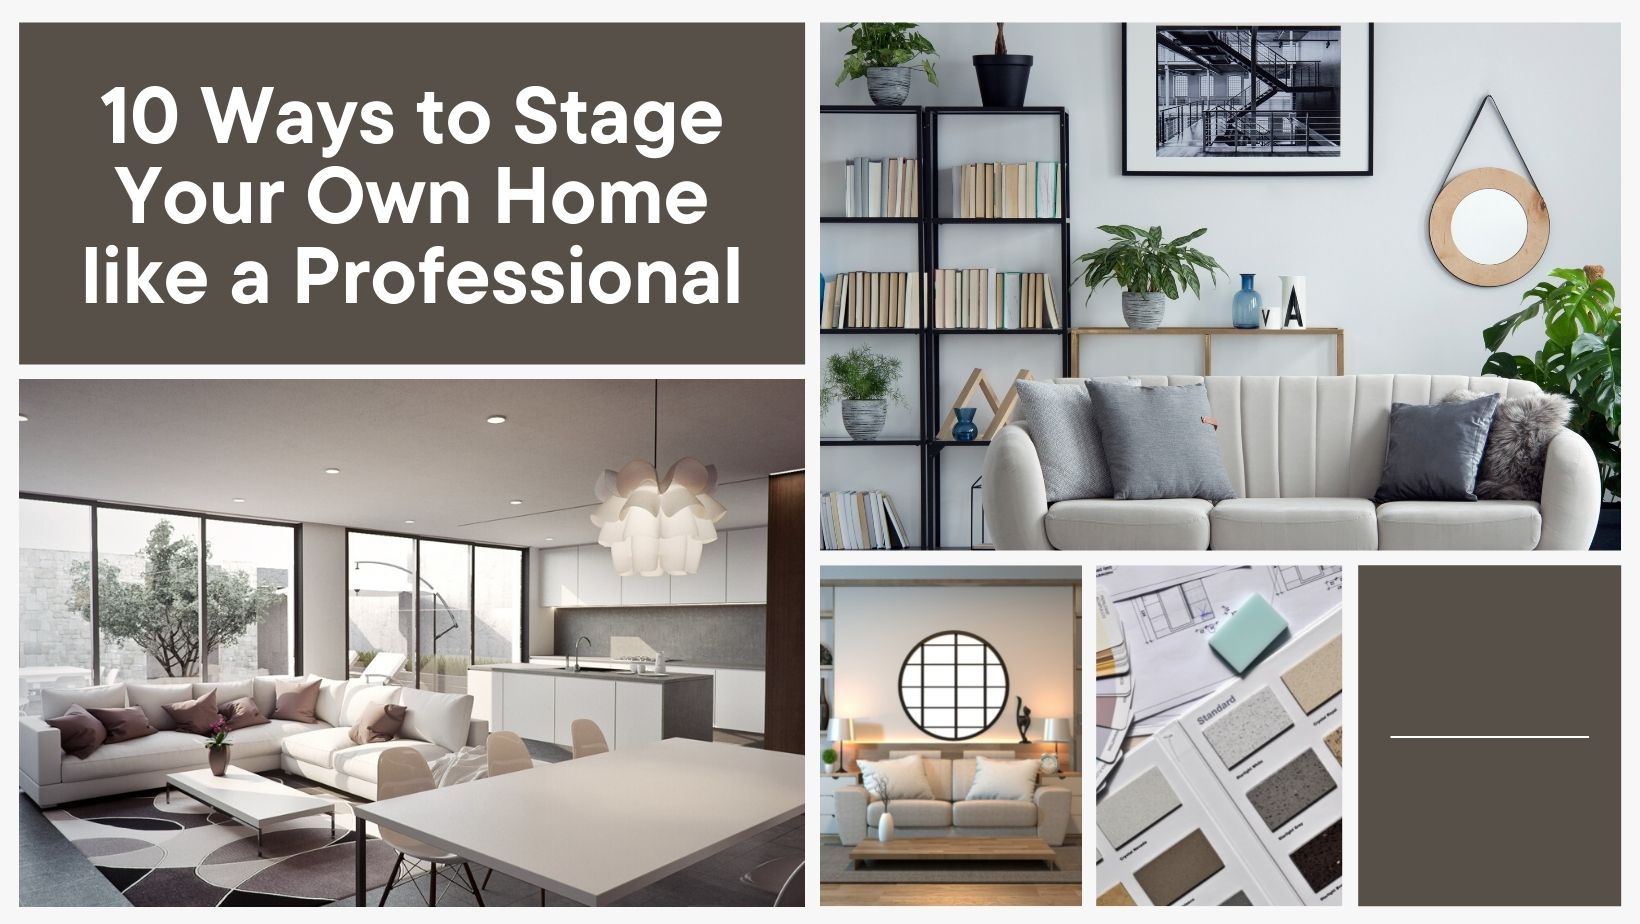 10 Ways to Stage Your Own Home like a Professional